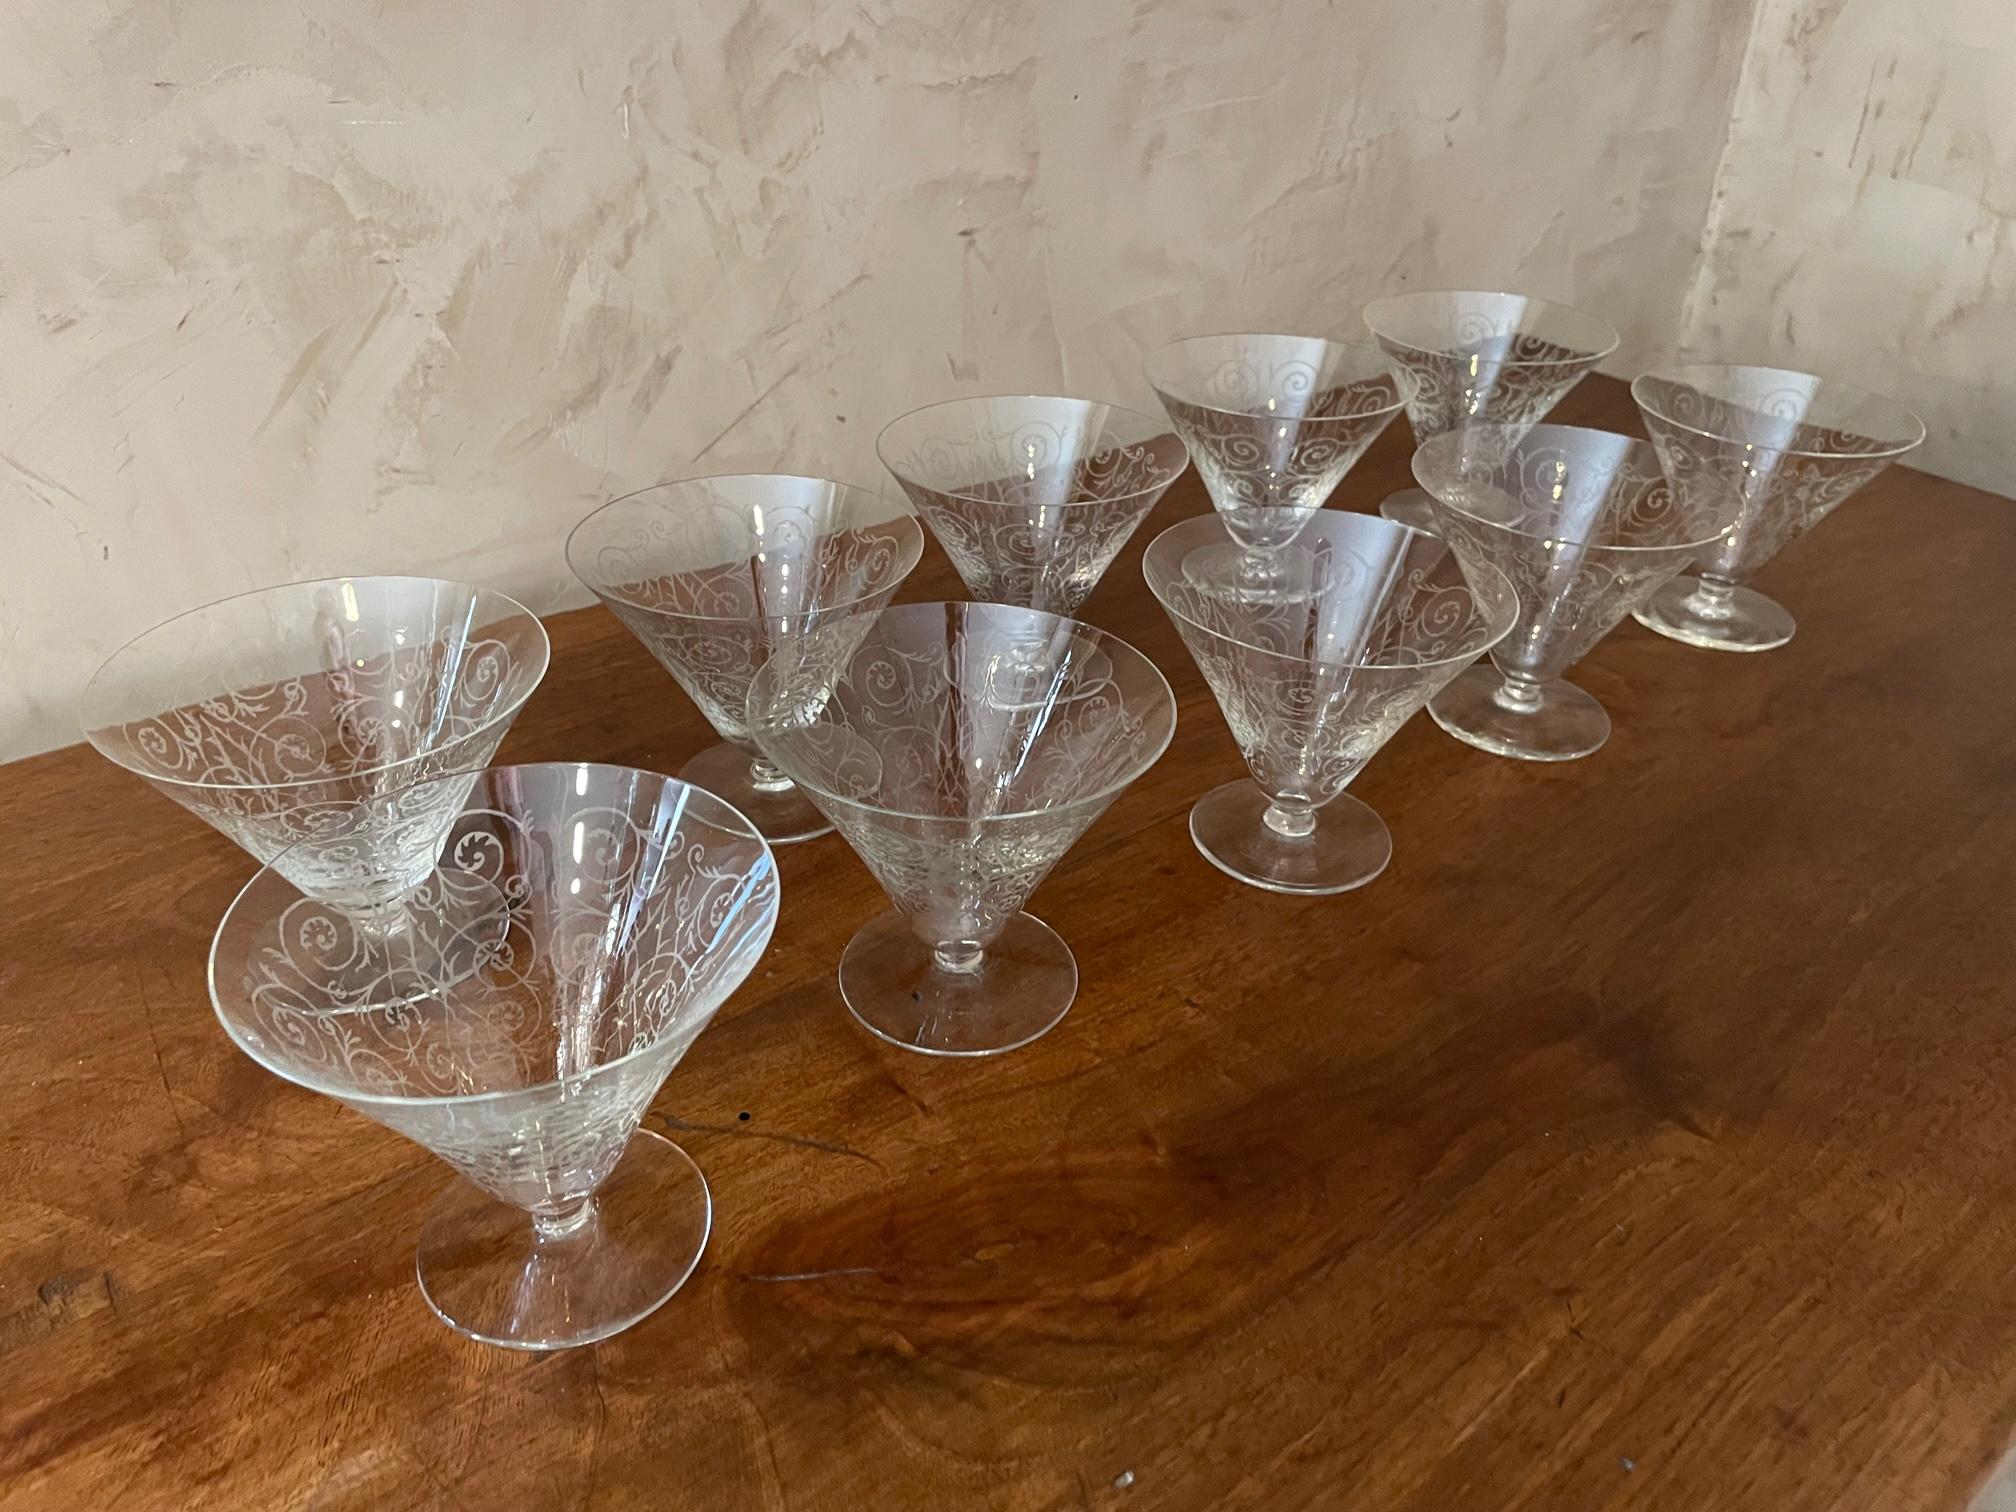 Set of 10 champagne glasses in the taste of the michelangelo model from baccarat. Good condition and very pleasant to use.
Very elegant and lightweight.